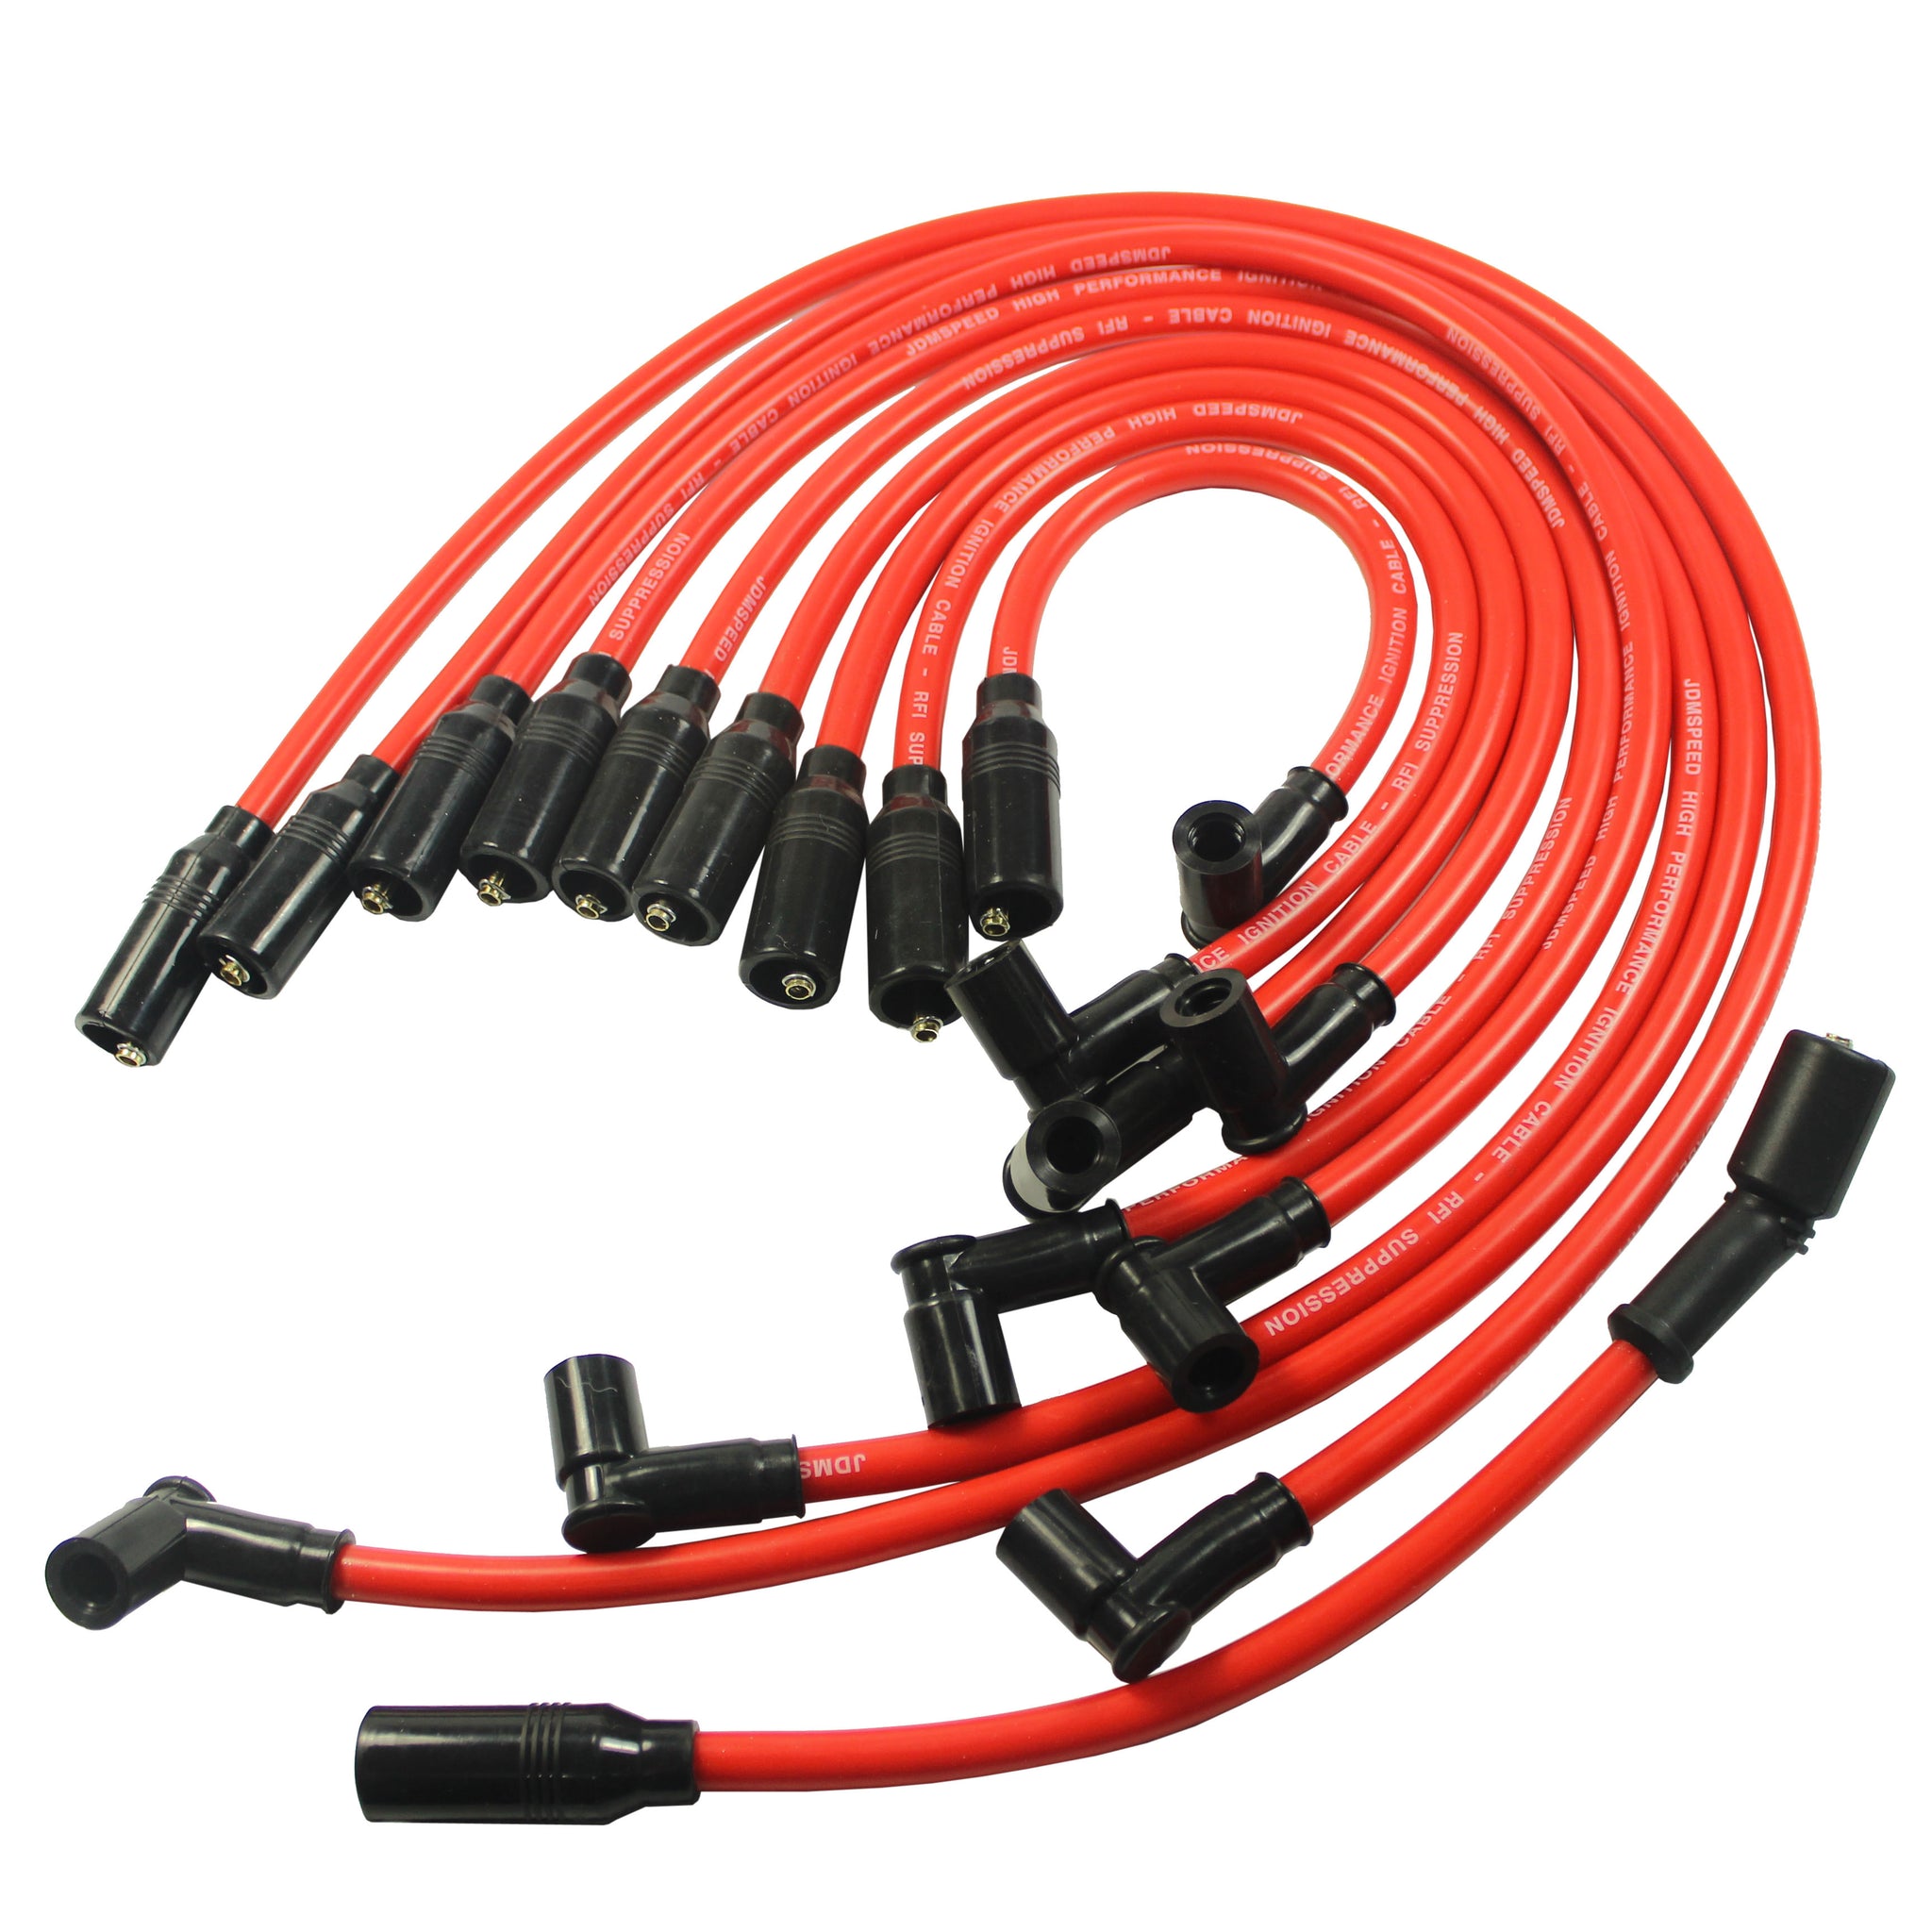 Spark Plug Wire Set, Livewires, Spiral Core, 10 mm, Red, 90 Degree Plug  Boots, HEI Style Terminal, GM V8, Kit